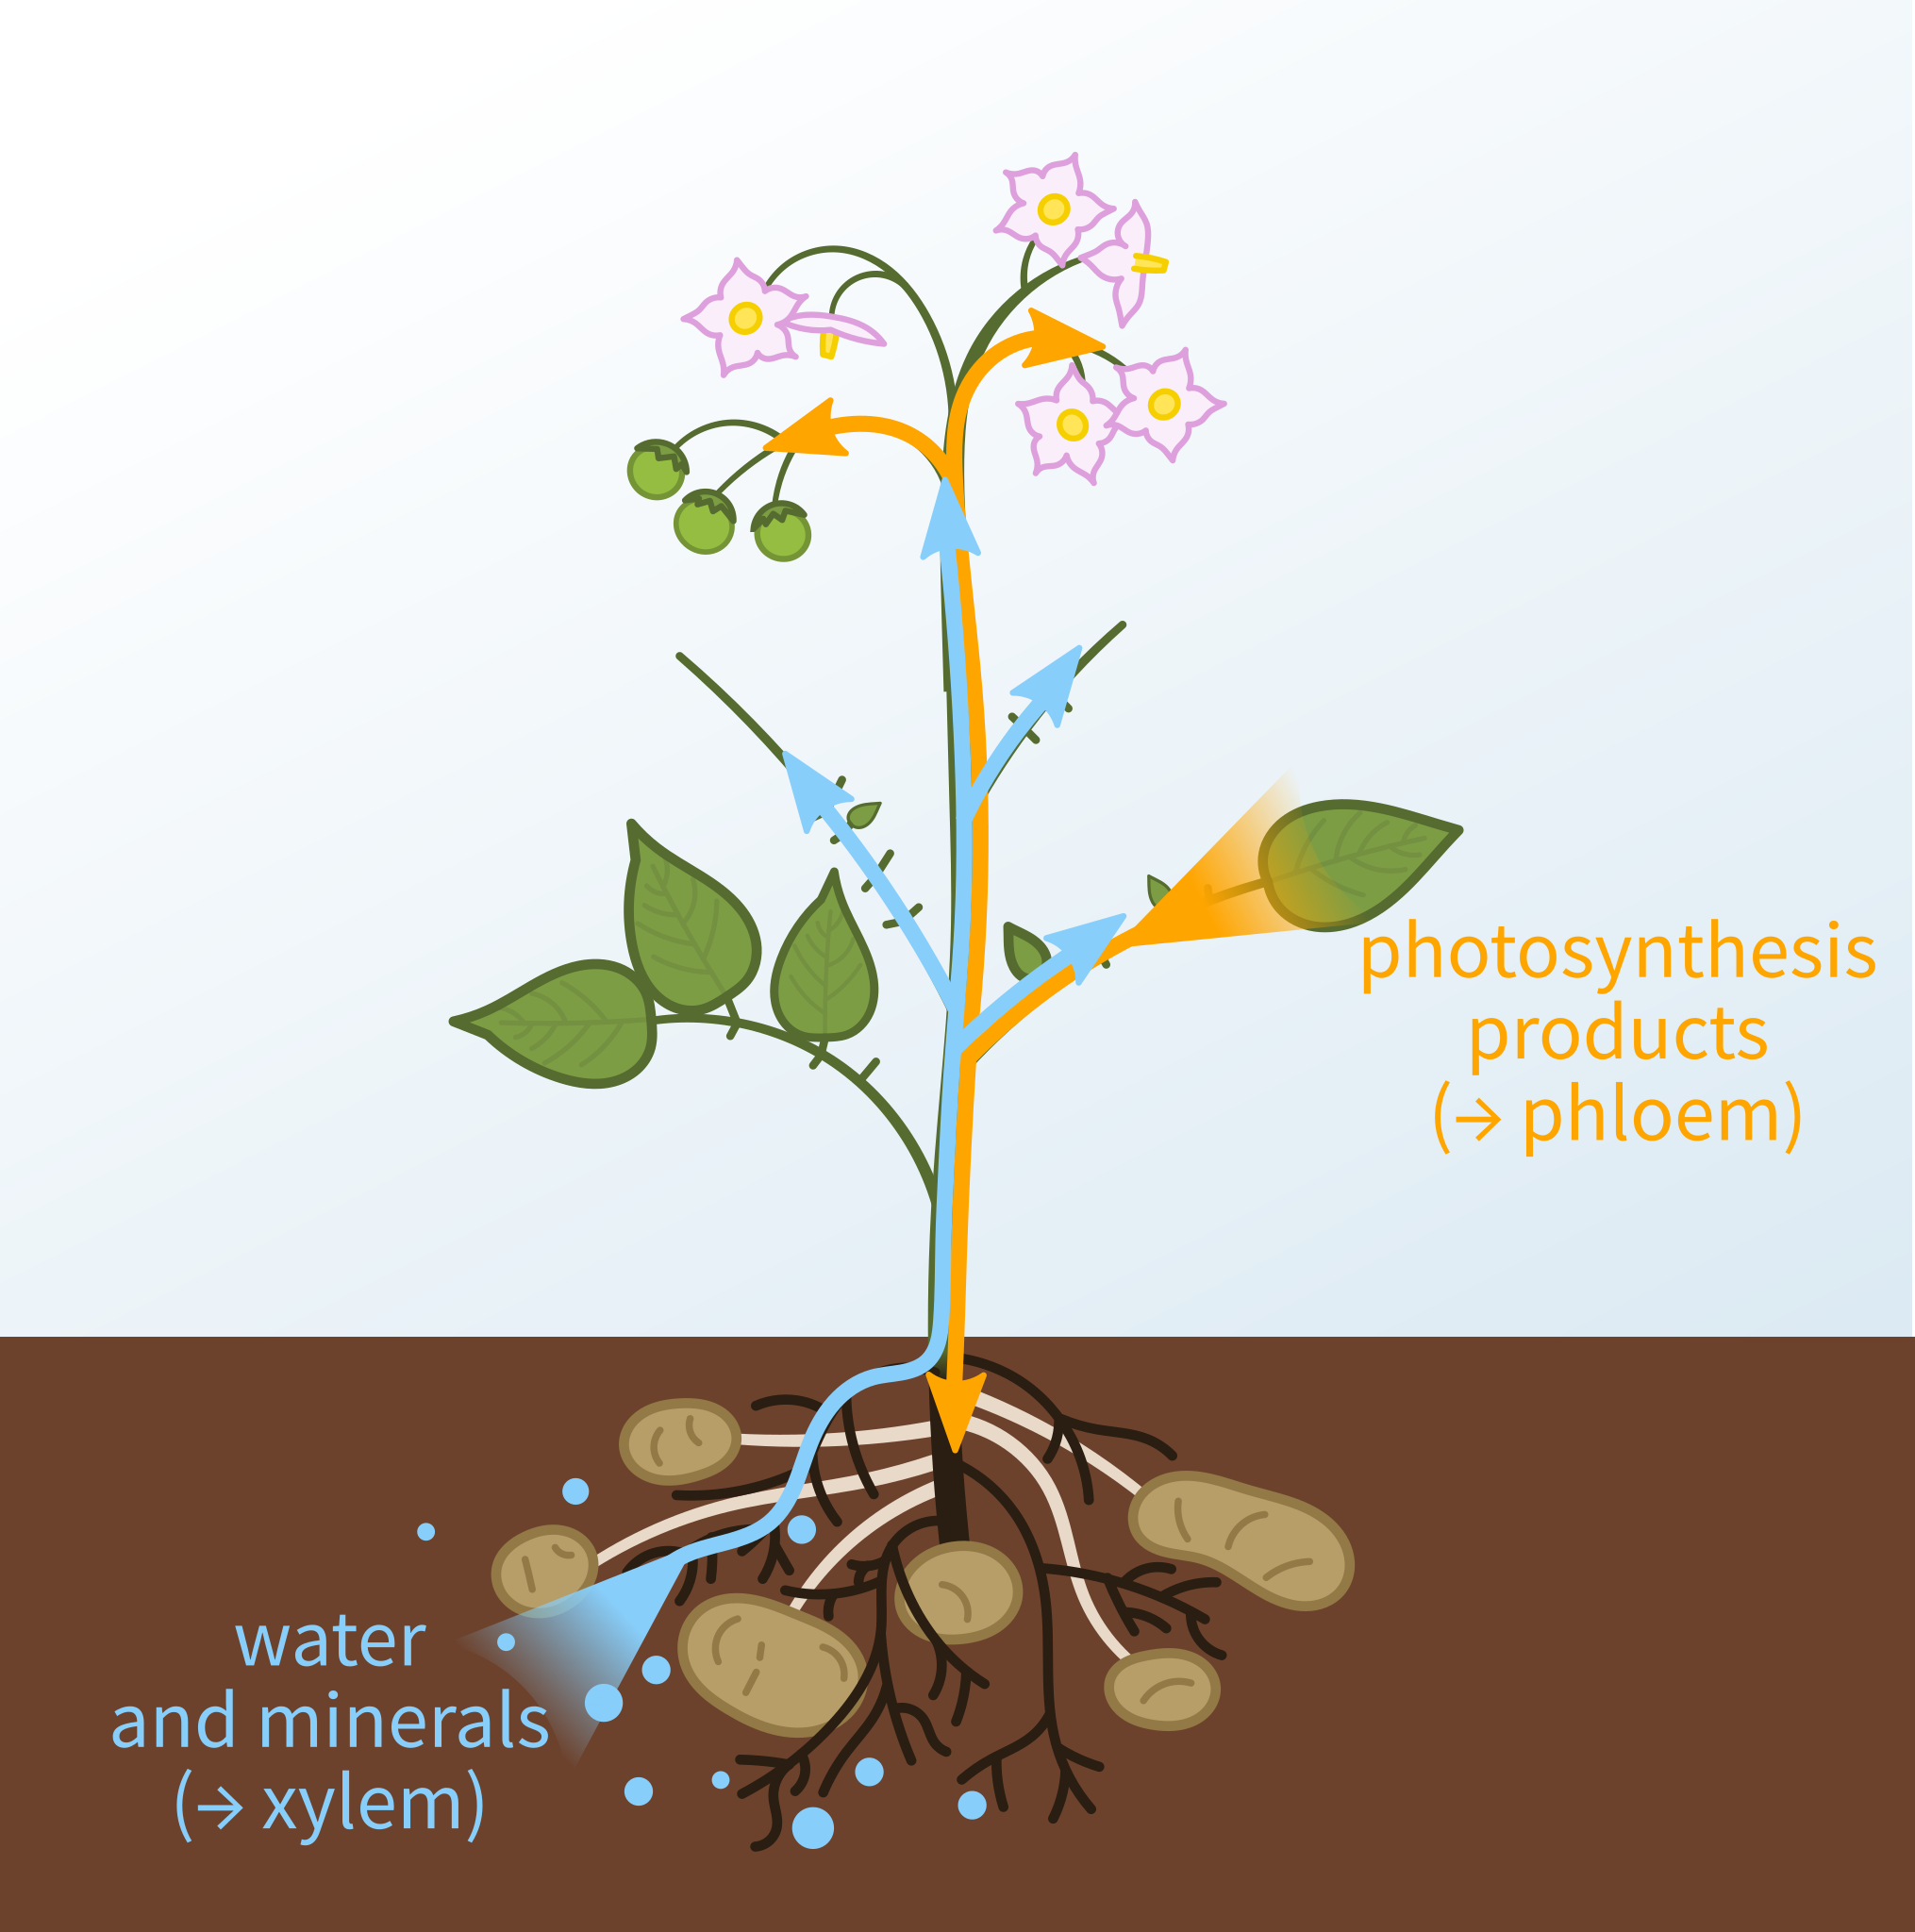 Diagram of a plant. The roots are shown underground, then there is a main stem with several shoots coming off it with leaves on them. At the top of the stem are some flowers. A blue line with arrows on it shows the xylem carrying water and mineral from the roots up to the rest of the plant. There is also a yellow line to show something called the phloem, which carries the products of photosynthesis from the leaves to the rest of the plant.